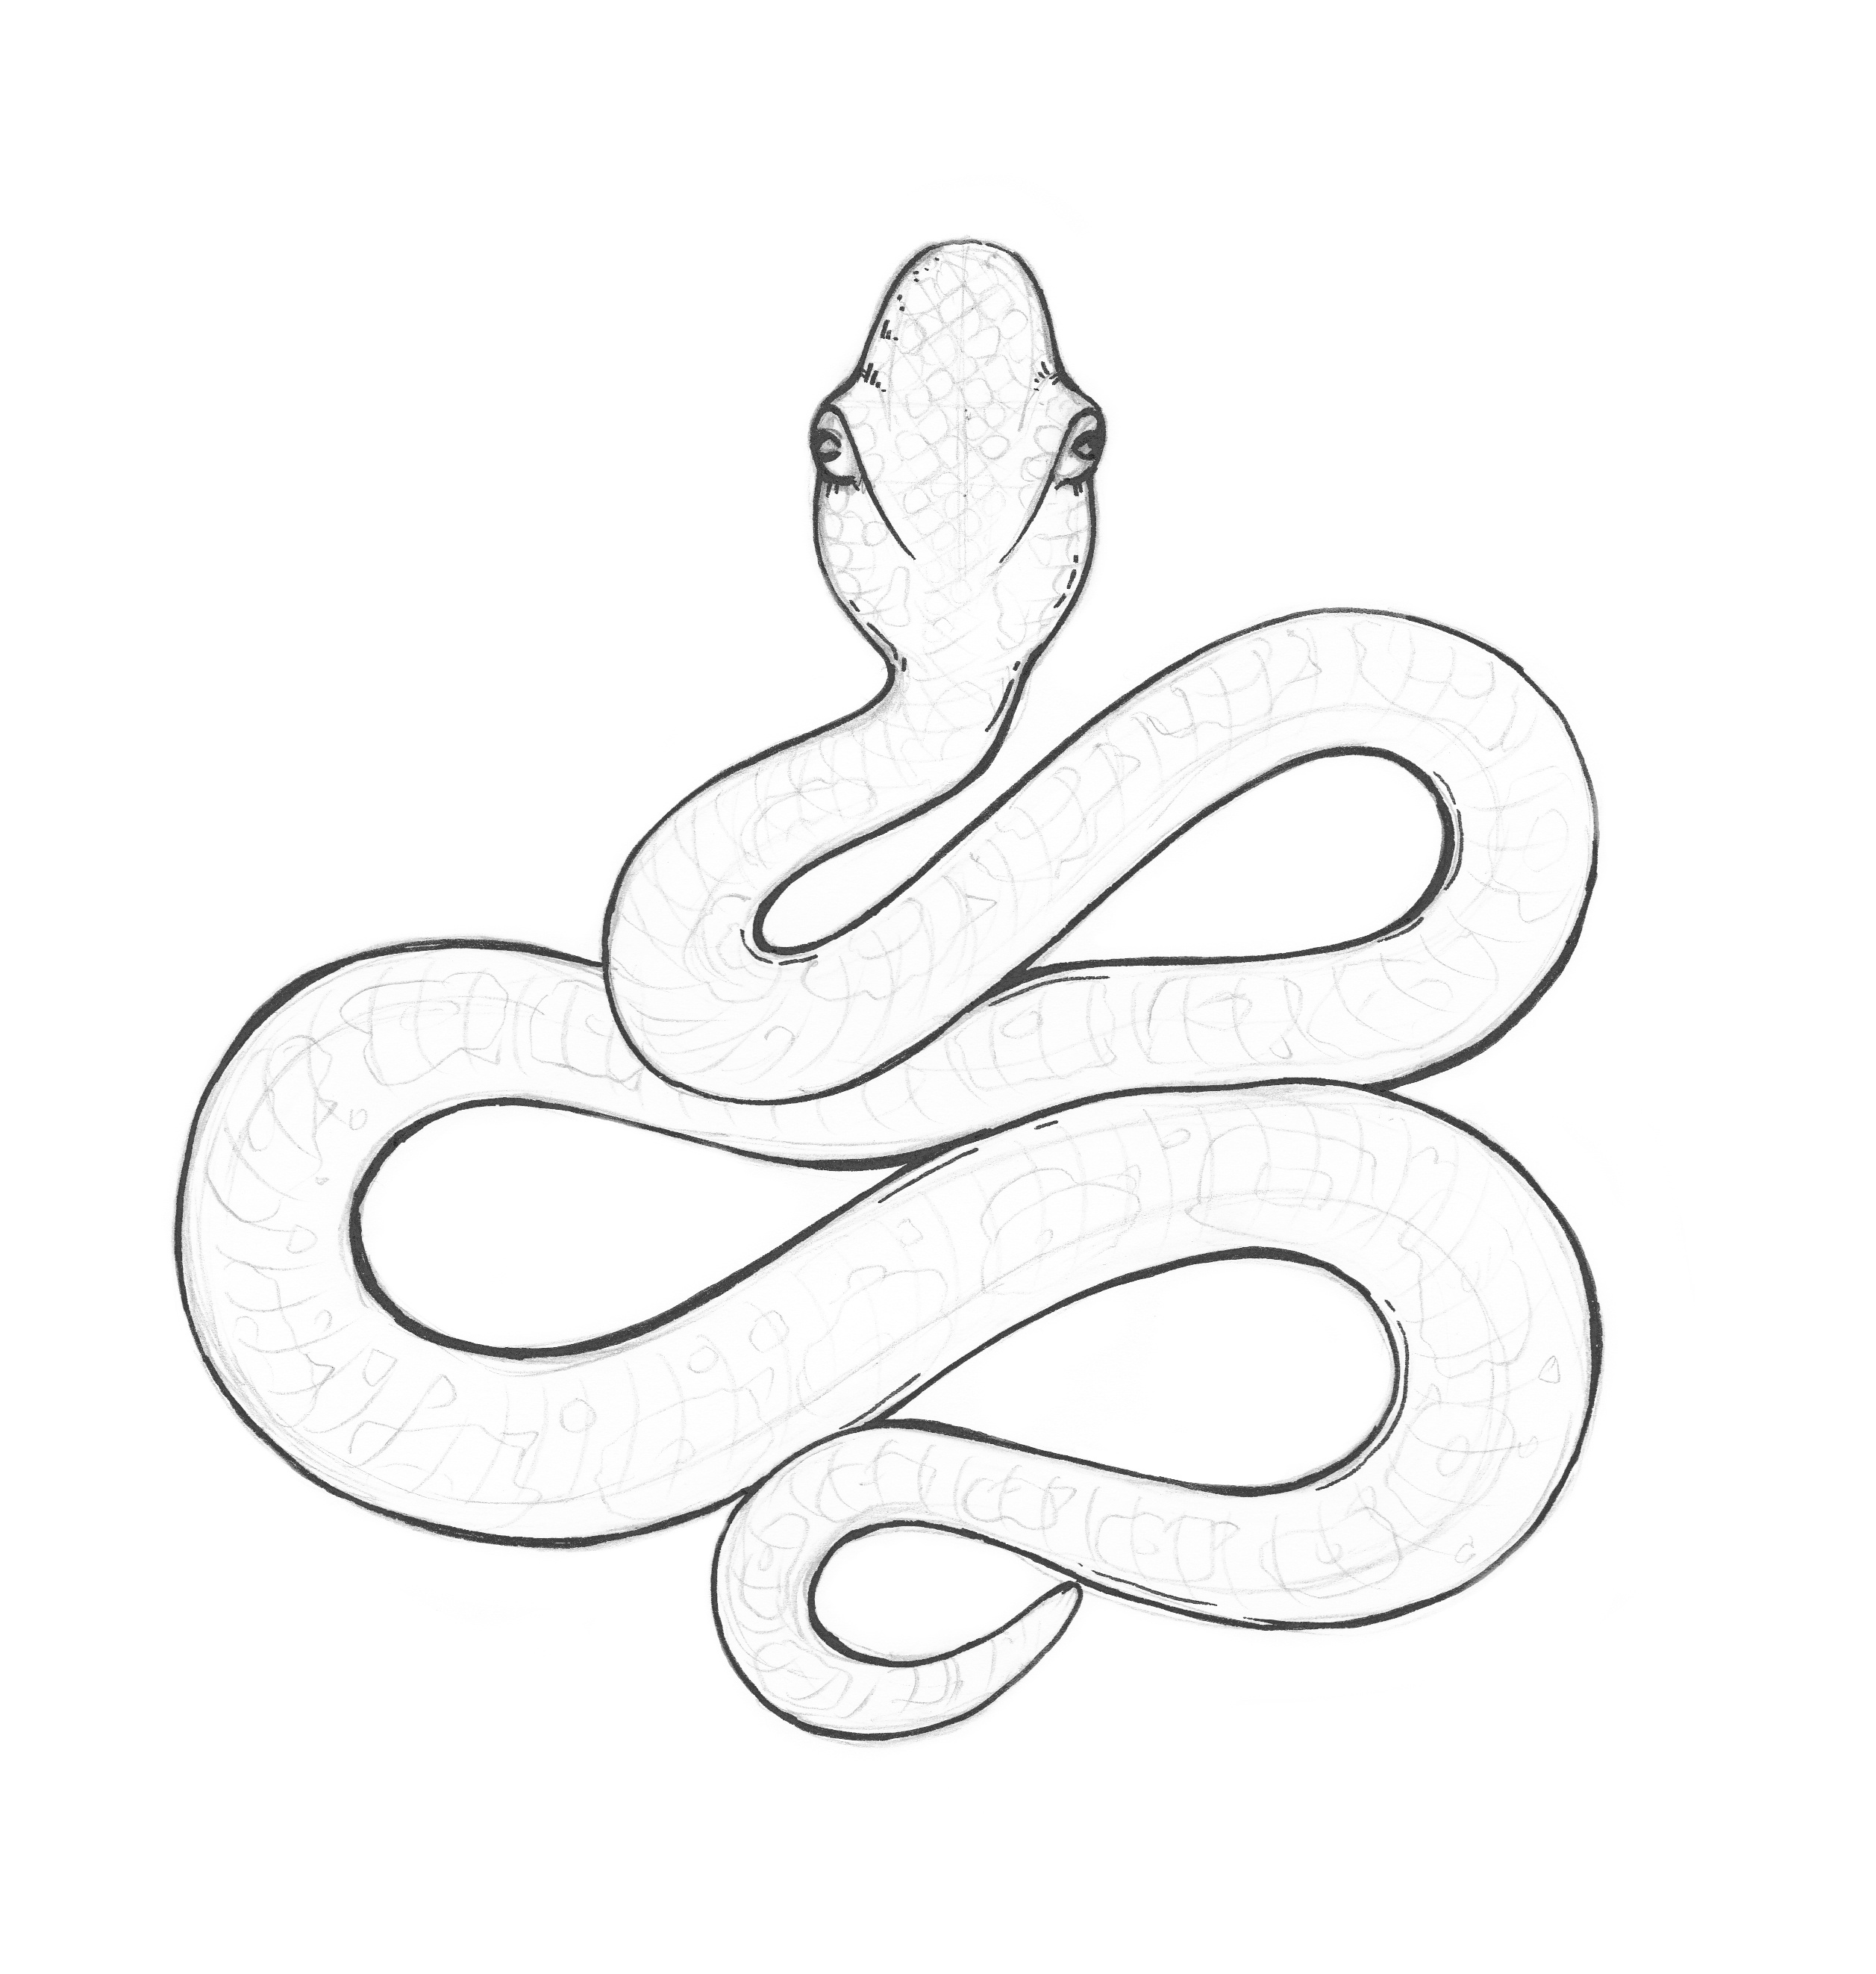 Realistic Snake Drawing Hand Drawn Sketch